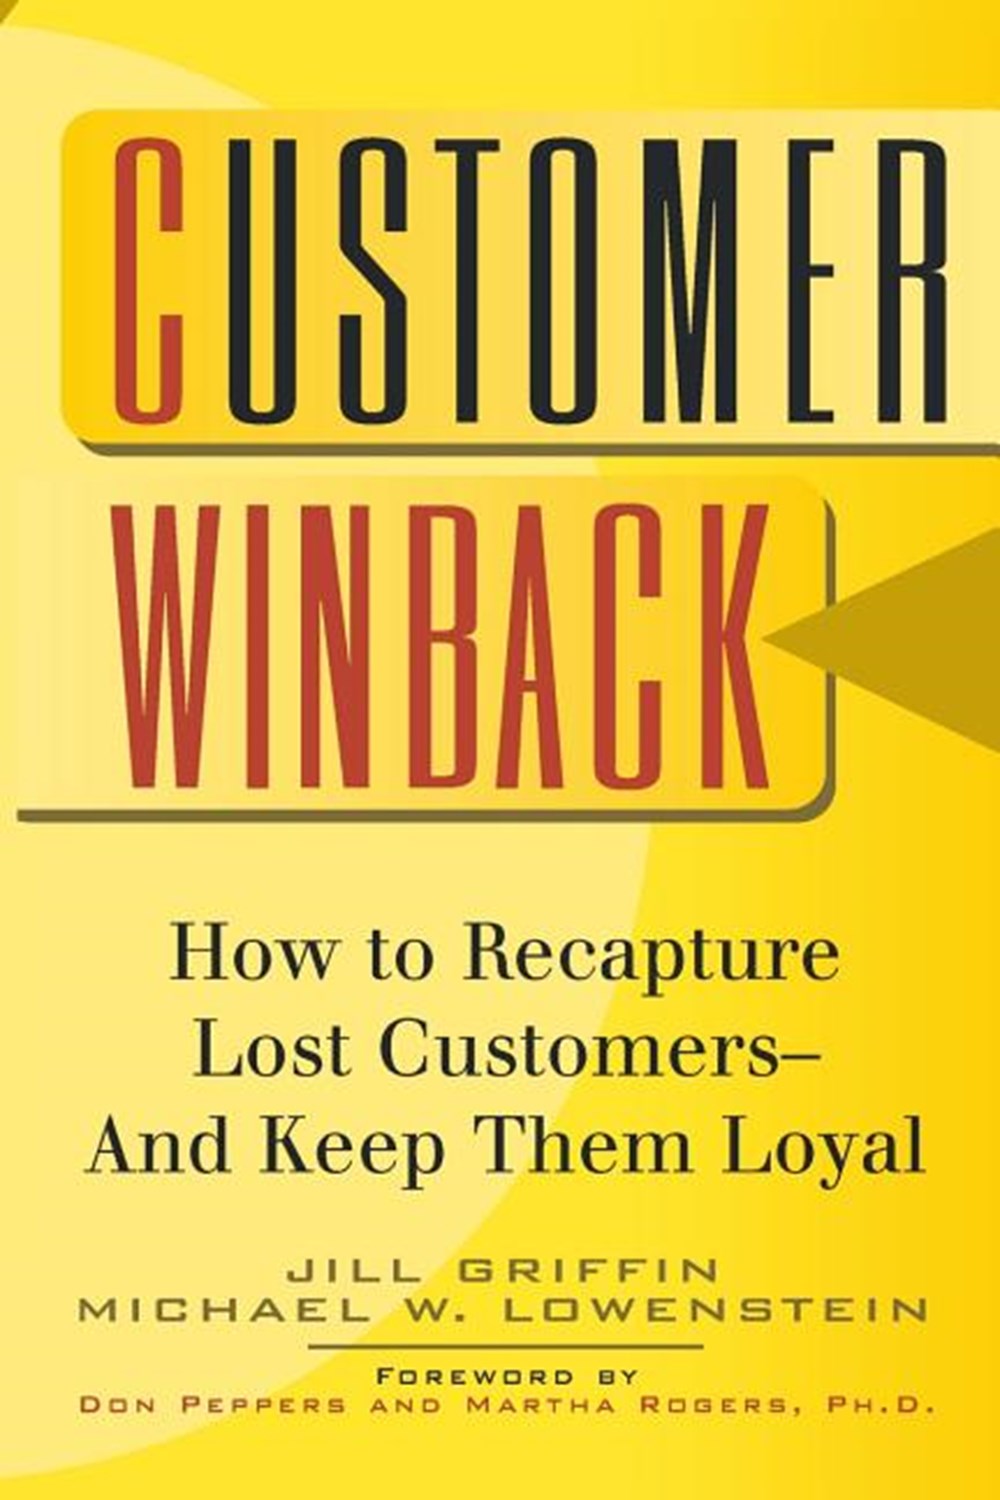 Customer Winback: How to Recapture Lost Customers--And Keep Them Loyal